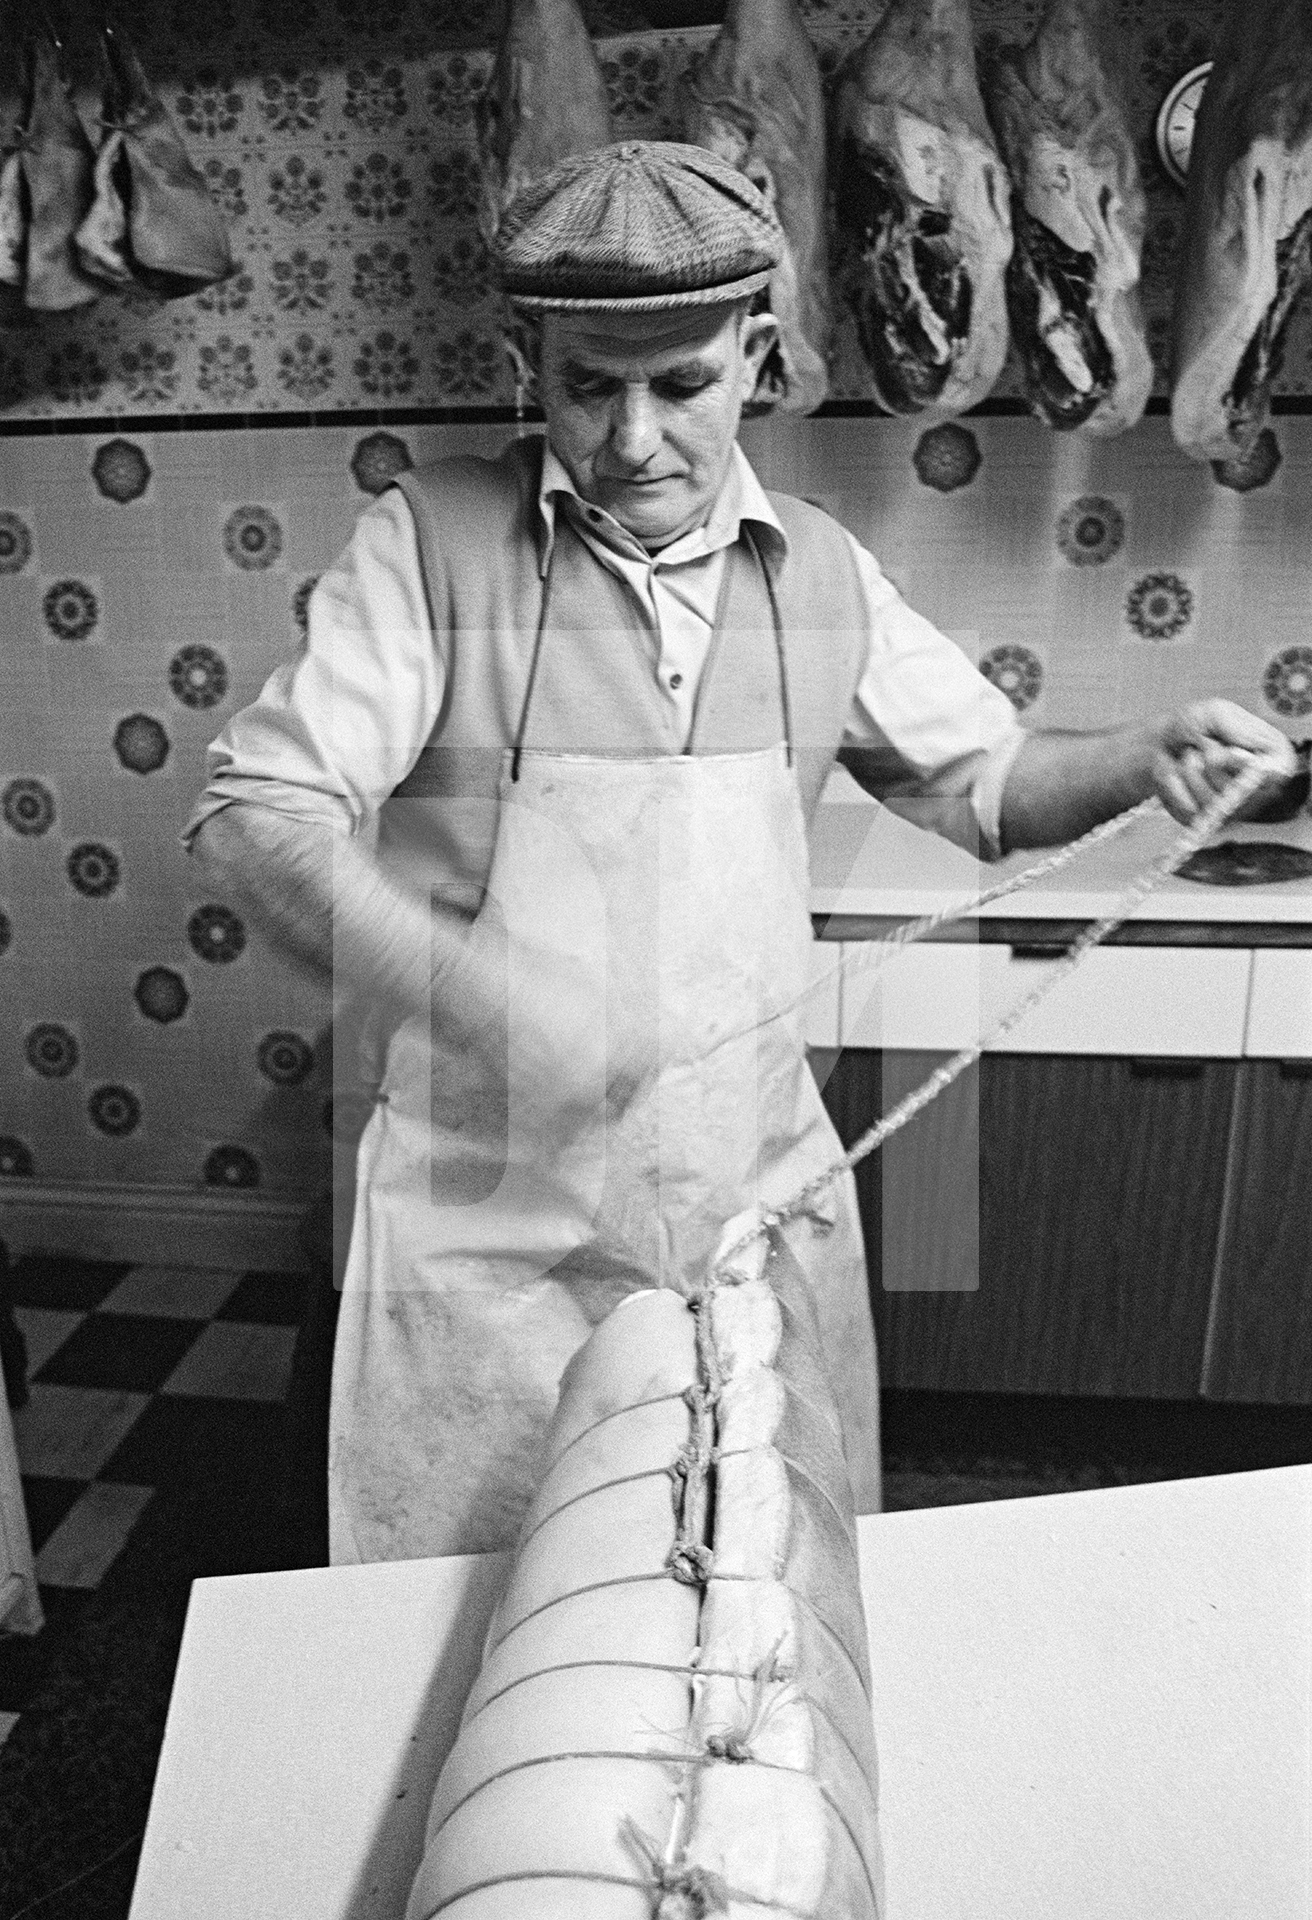 Cyril Richardson knotting twine on a roll of bacon. North Yorkshire 1976 by Daniel Meadows